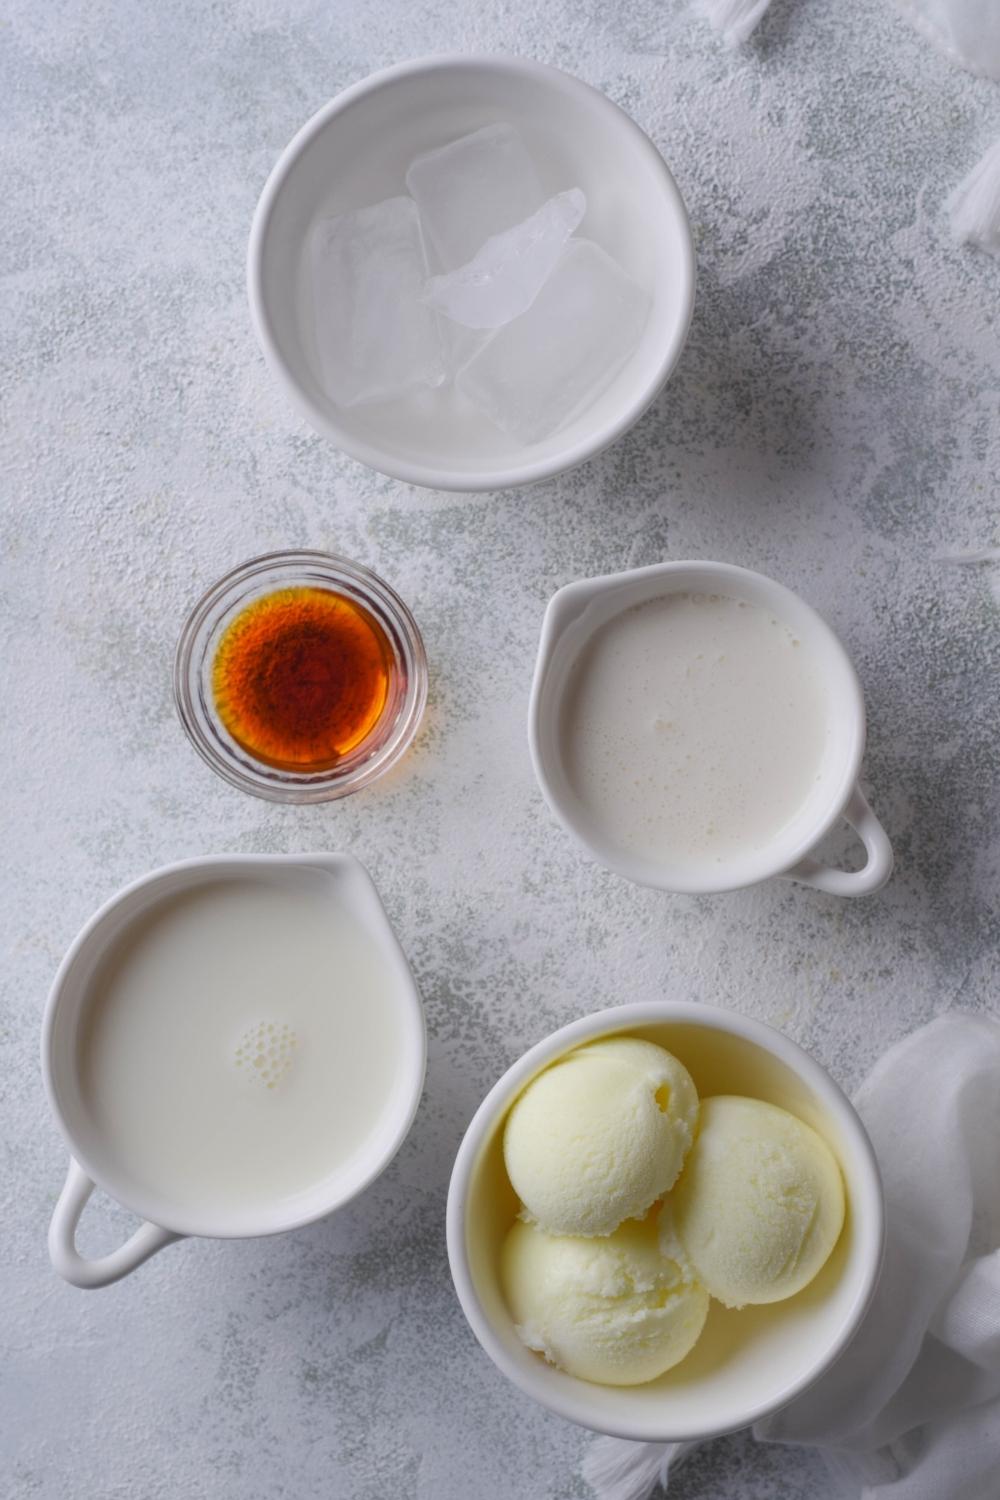 An overhead view of various bowls with ice cubes, vanilla extract, whole milk, and scoops of ice cream.